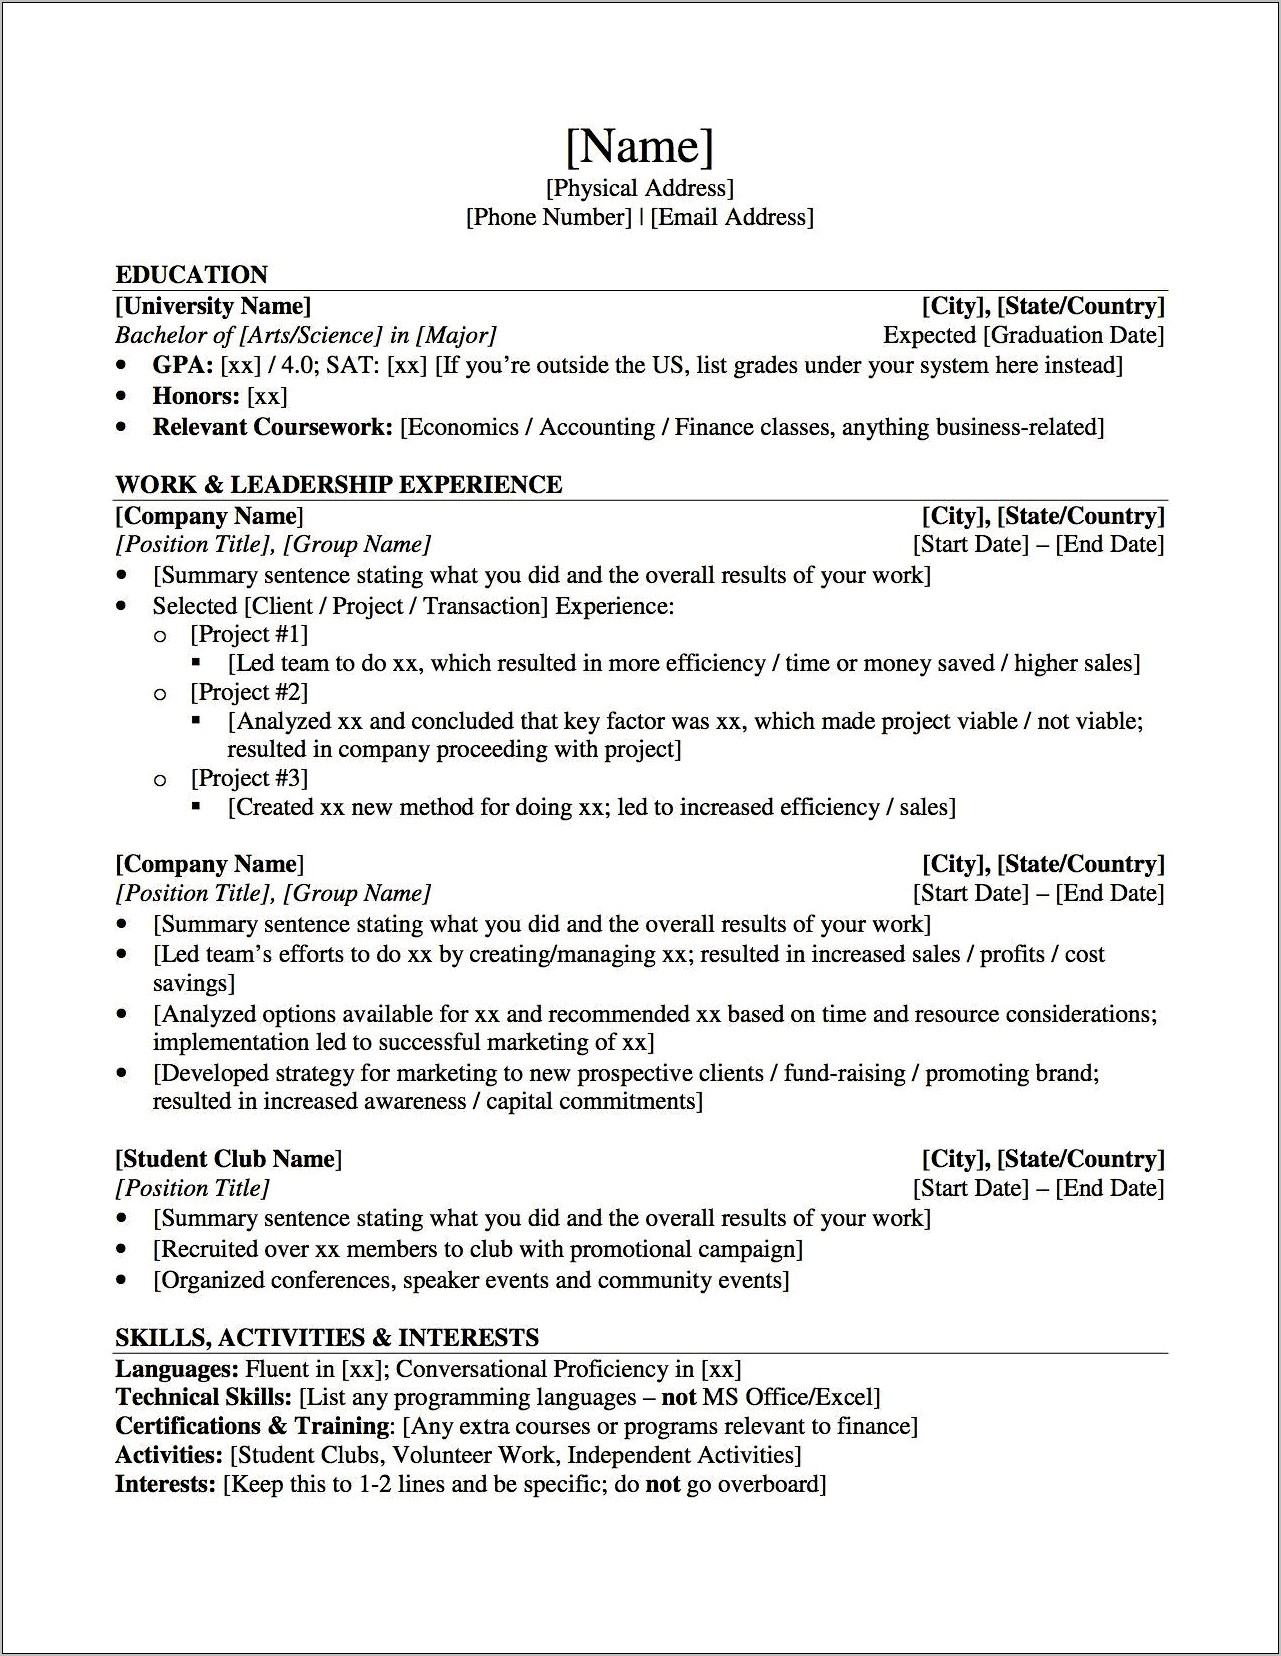 Expired Security Clearance On Resume Example